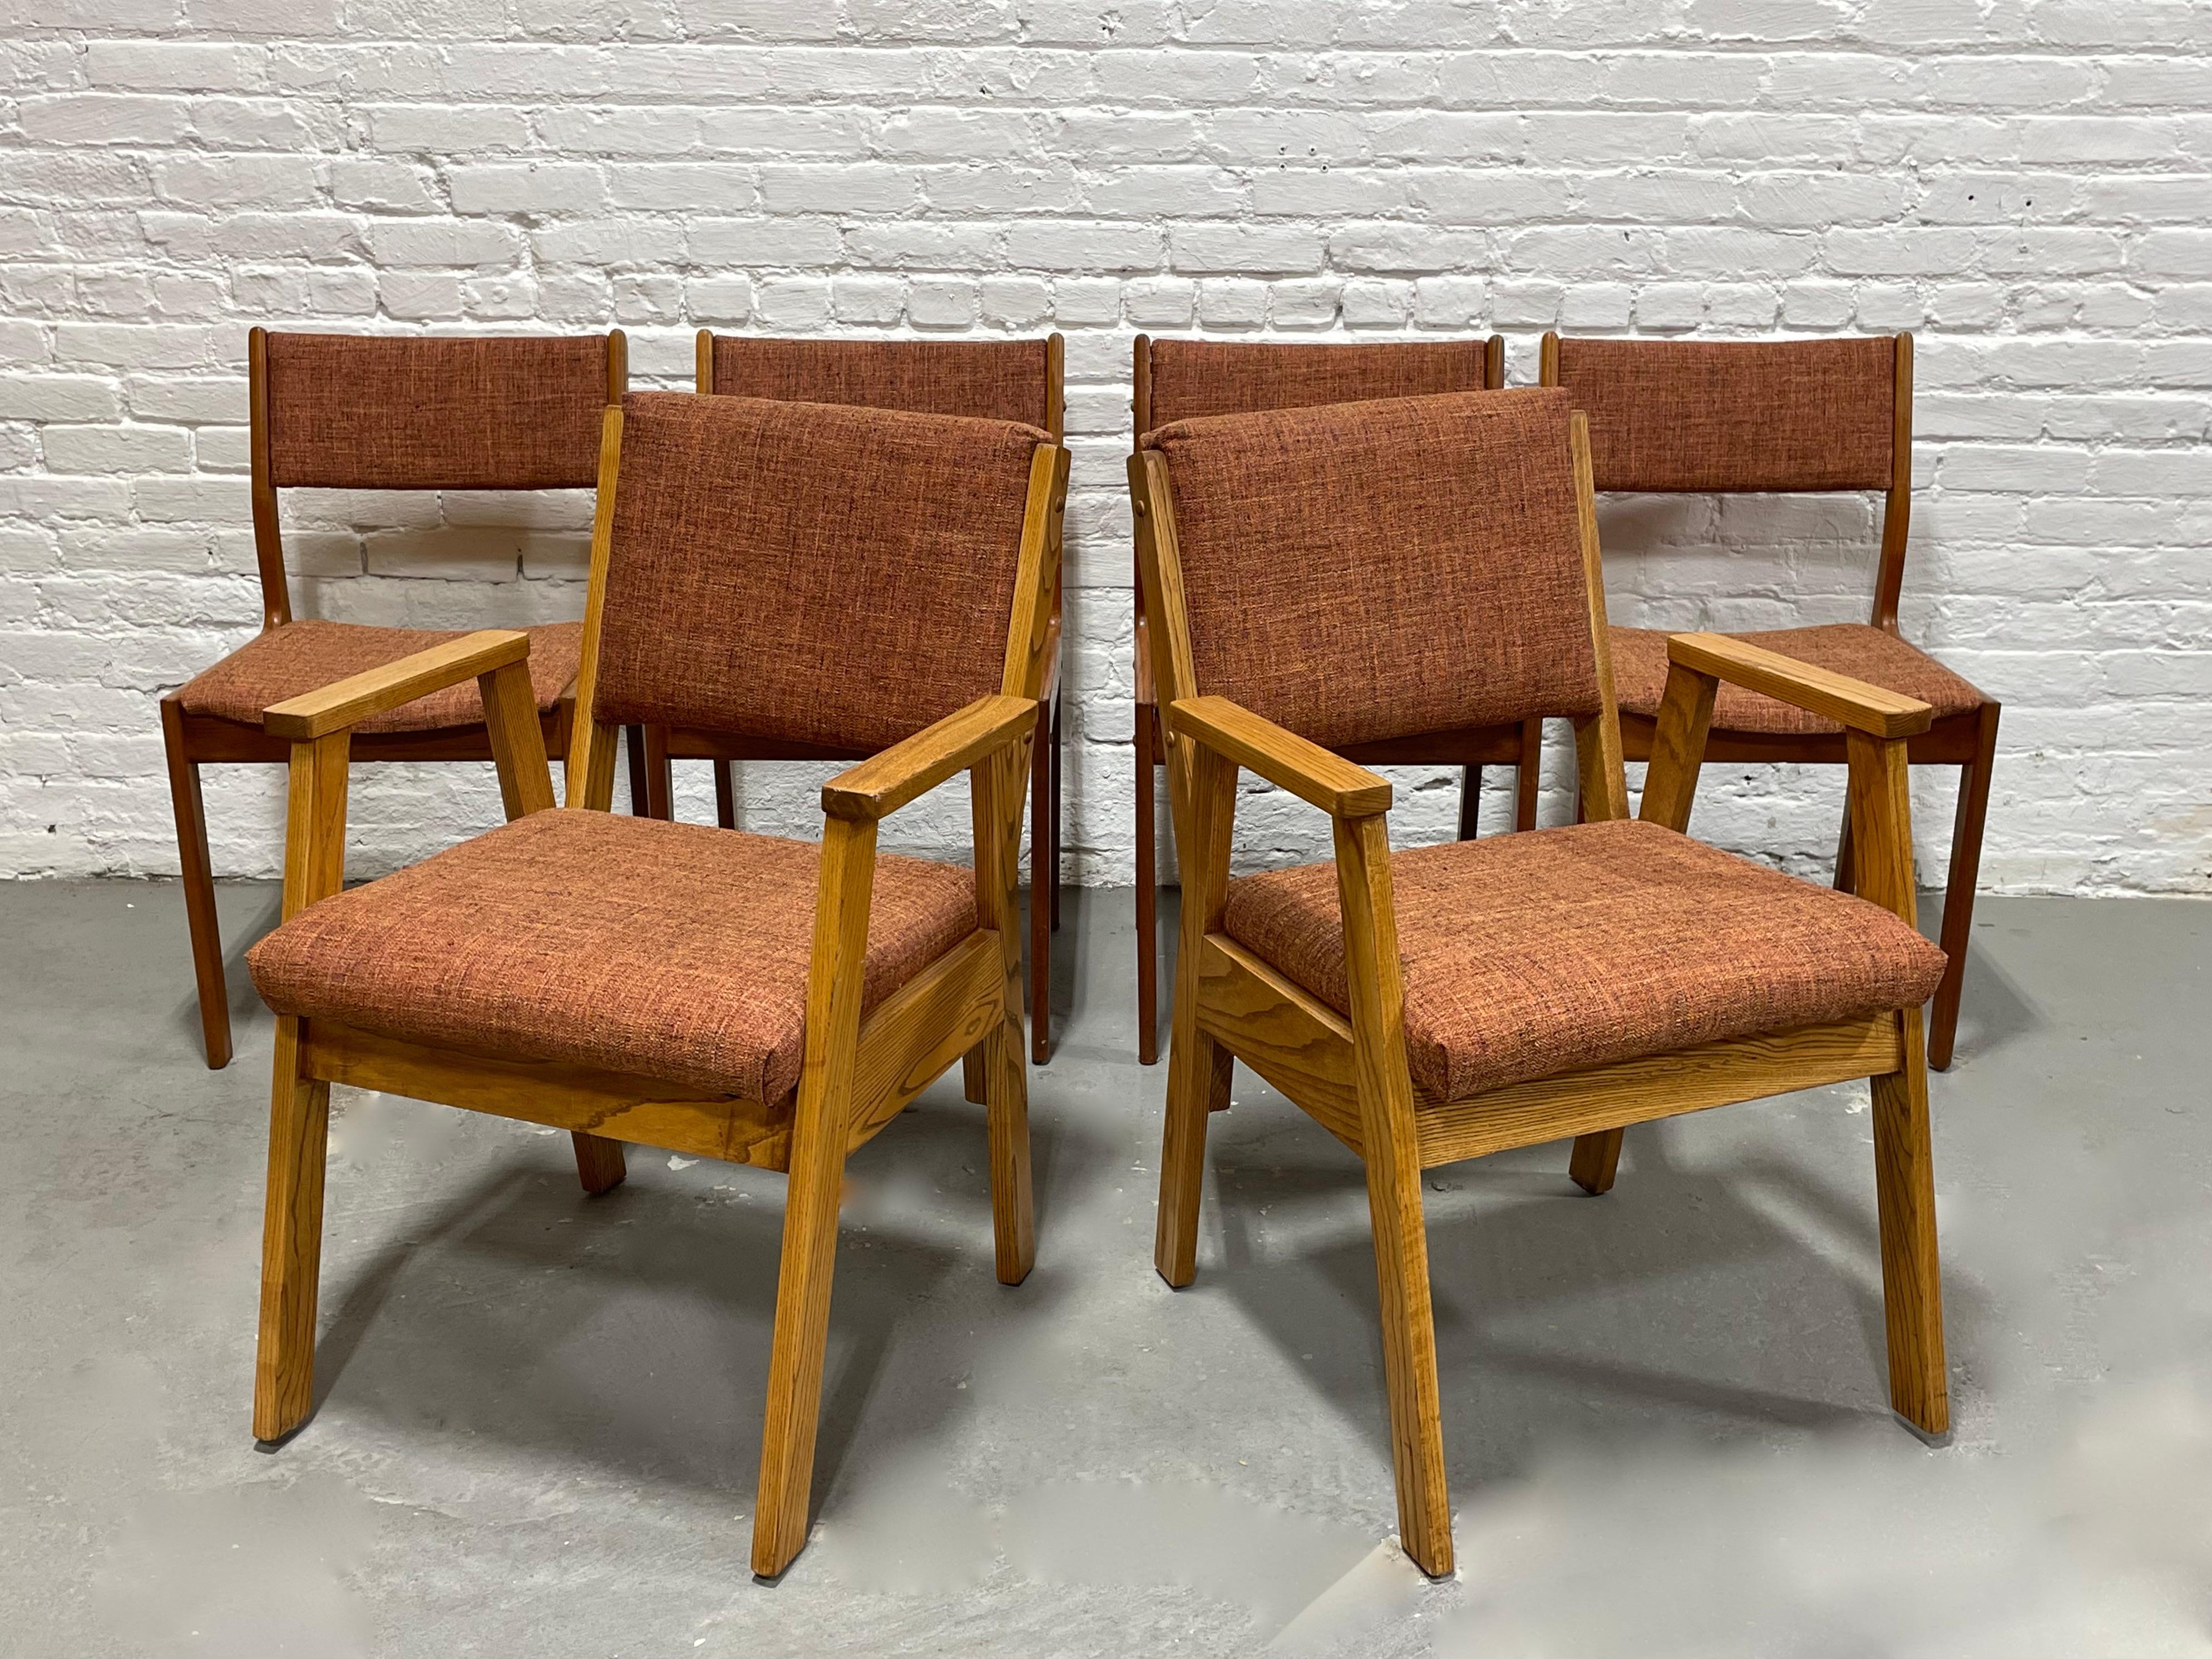 Mid Century Modern Dining Chairs, Set of 6, c. 1960's. This set is upholstered in the most beautiful orangey upholstery and consists of four Danish teak side chairs as well as a pair of solid oak armchairs.  While the upholstery is the same across